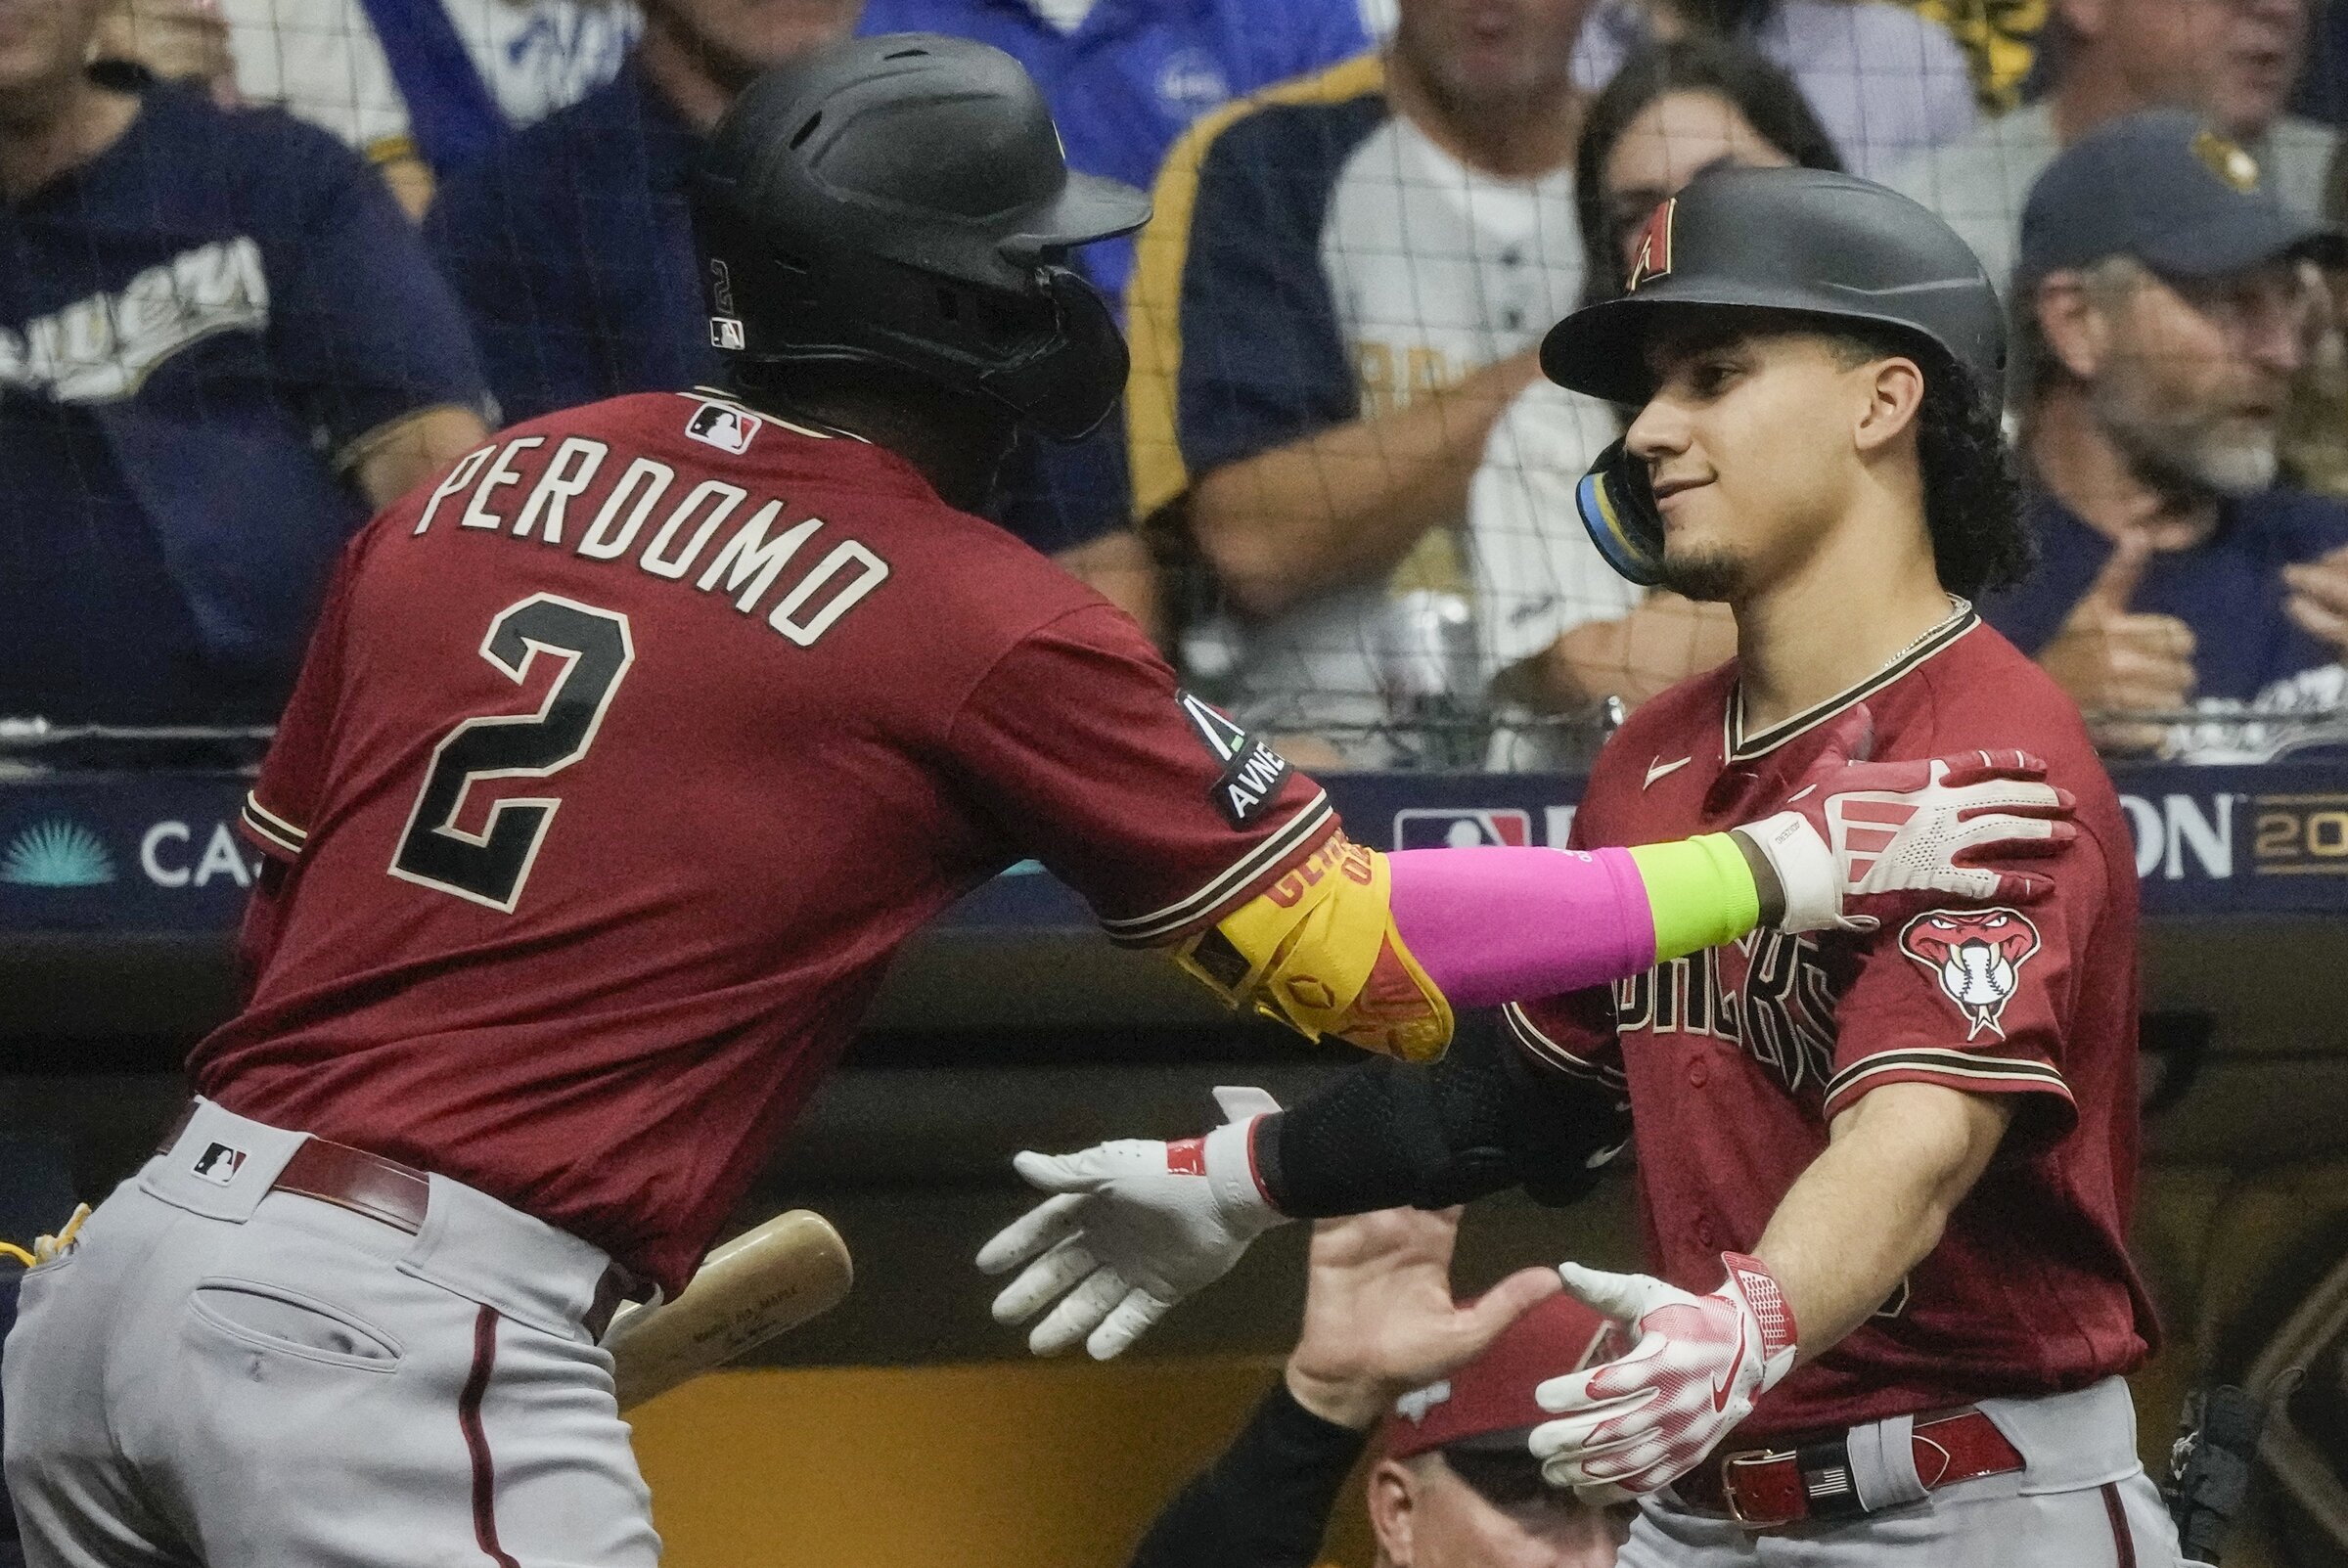 Bohm, Realmuto hit back-to-back homers as Phillies rally for 4-2 victory  over Brewers